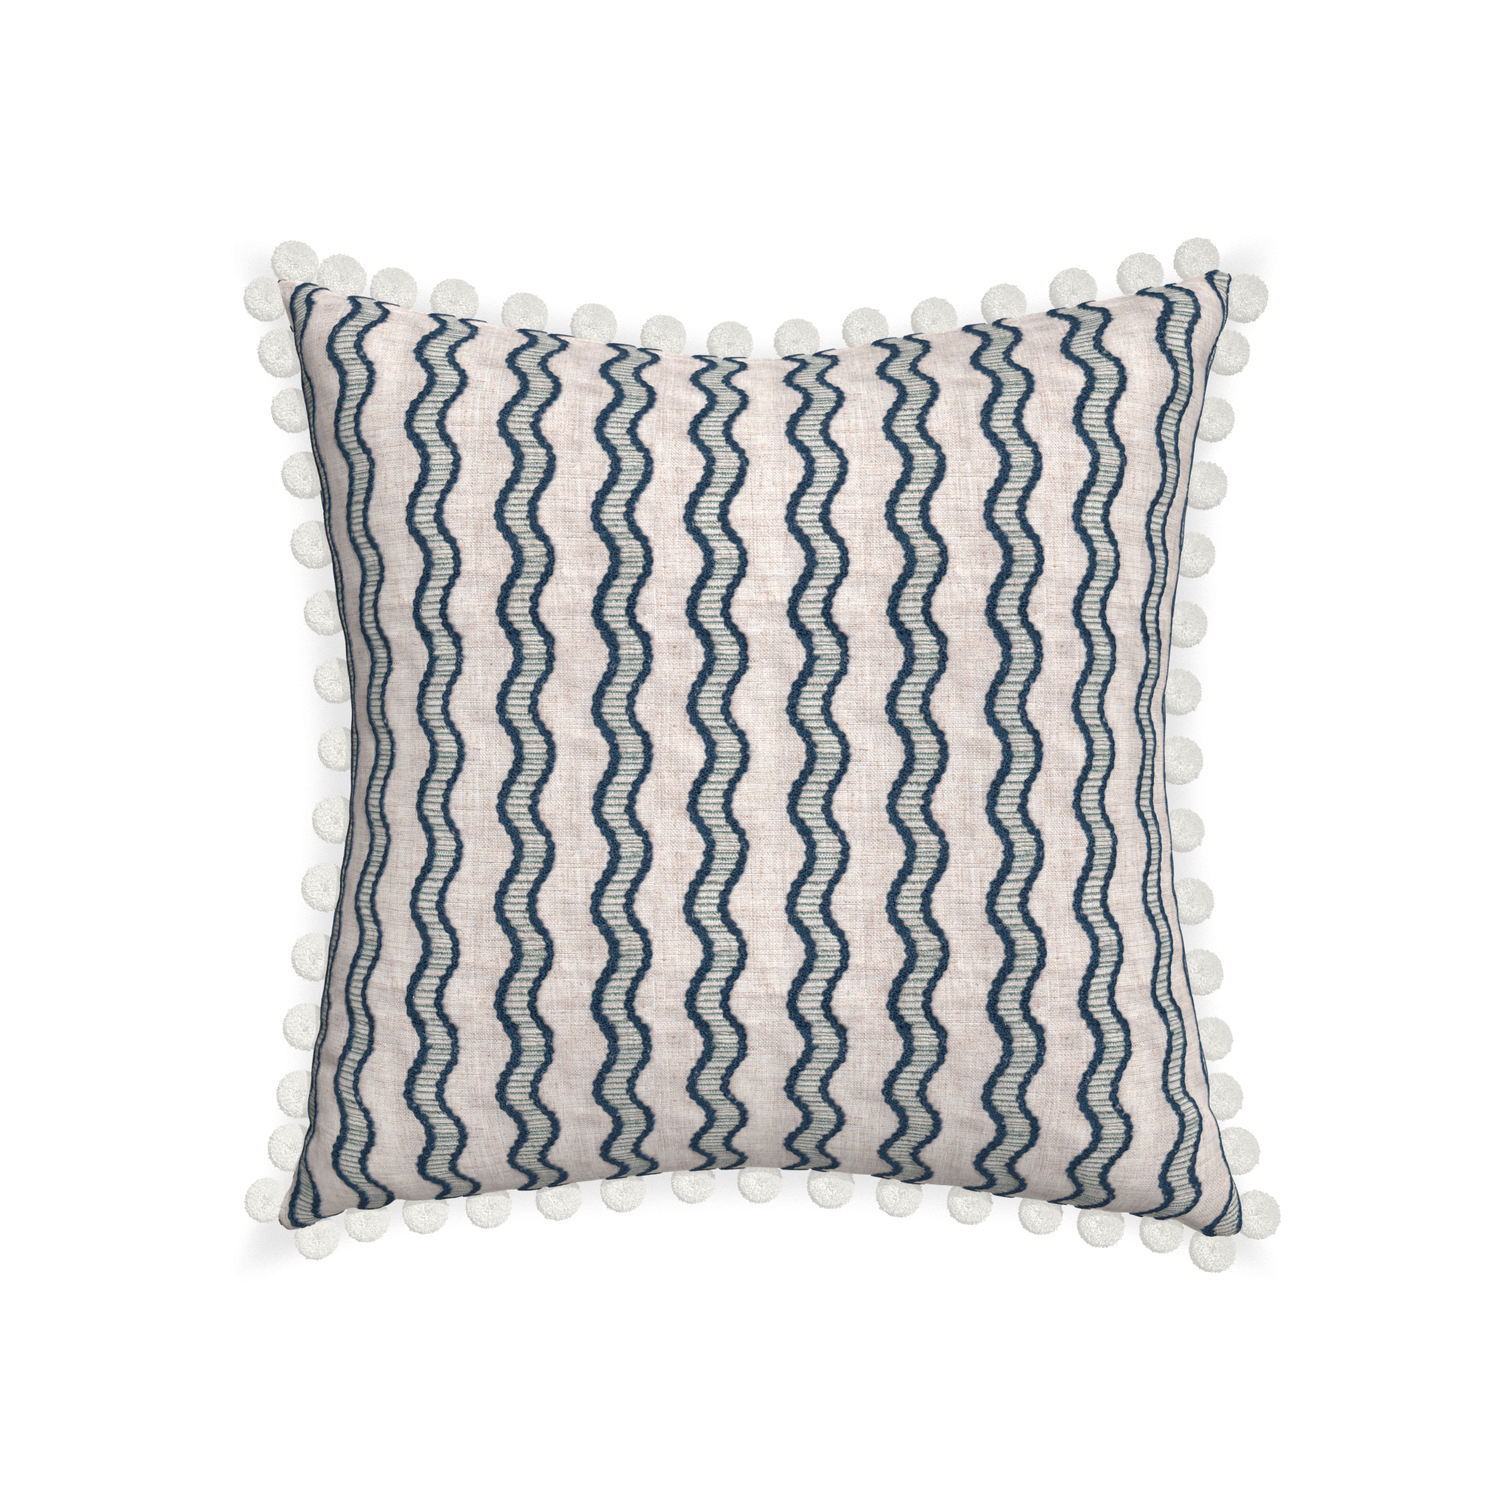 22-square beatrice custom embroidered wavepillow with snow pom pom on white background